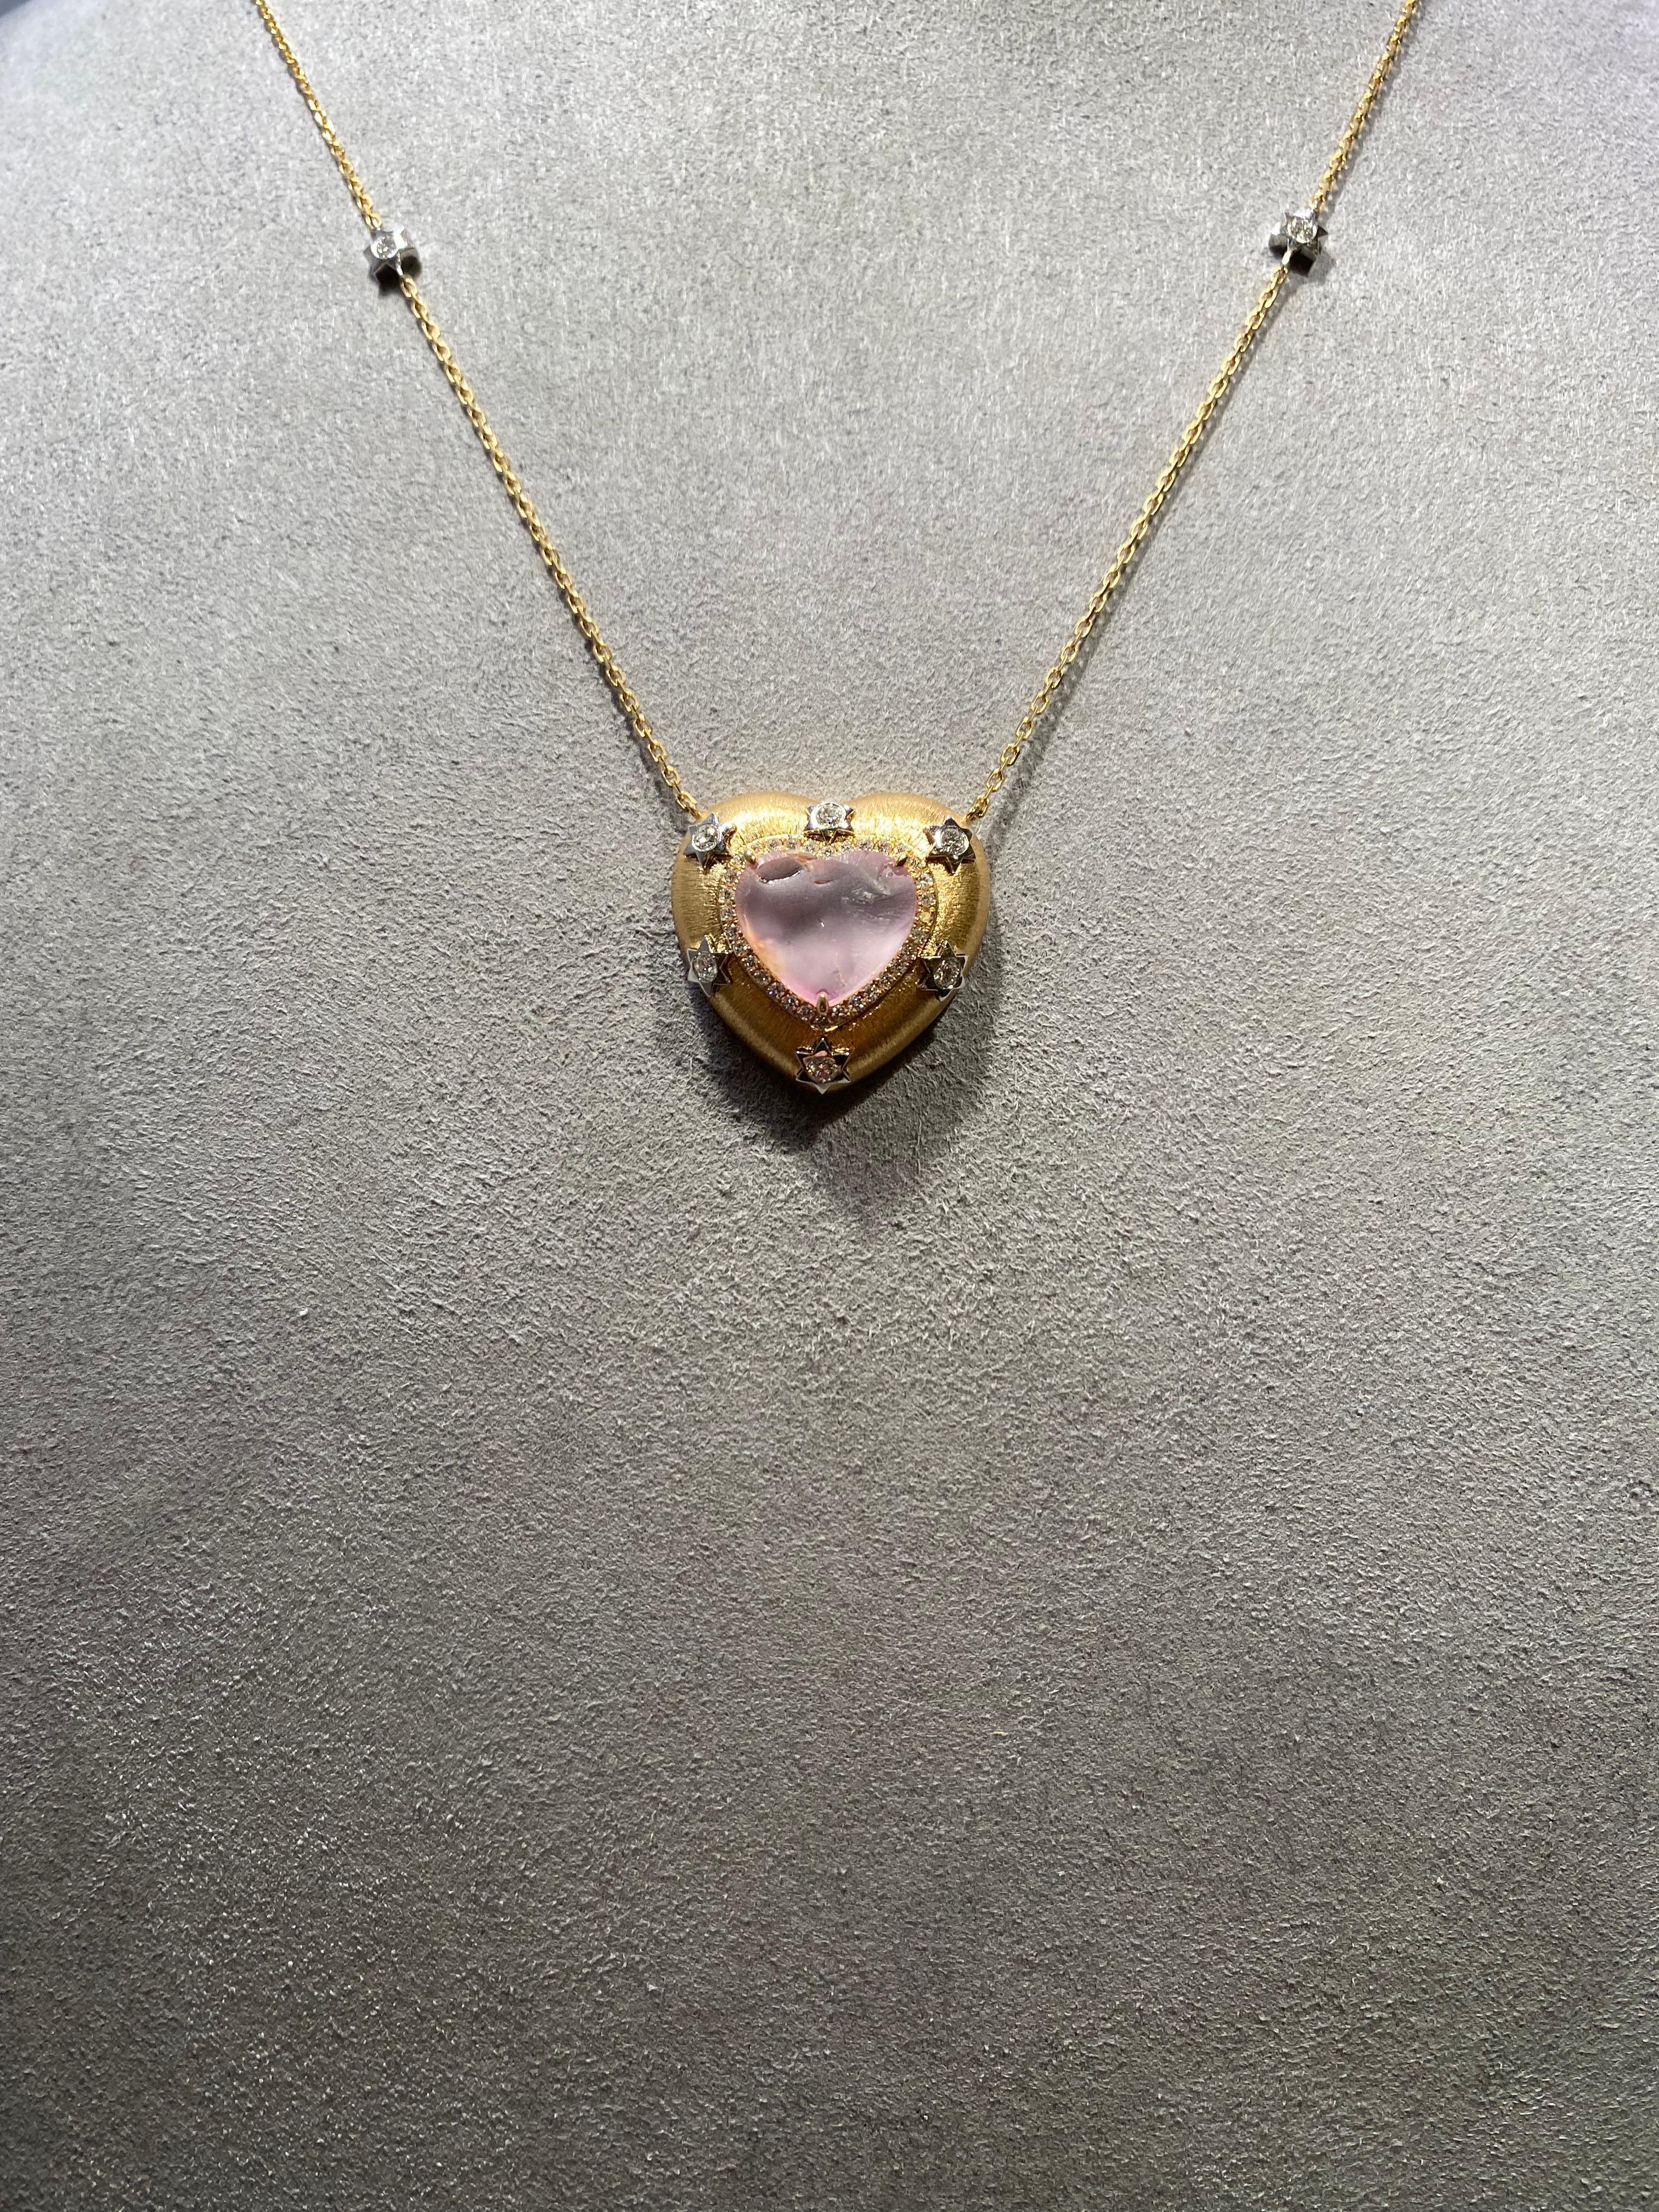 This is a heart shape pendant necklace. The length of the necklace is adjustable and there are 2 diamond set star motif integrated into the chain. The star motif in the chain matches the ones that surrounded the pink sapphire. The pink sapphire is